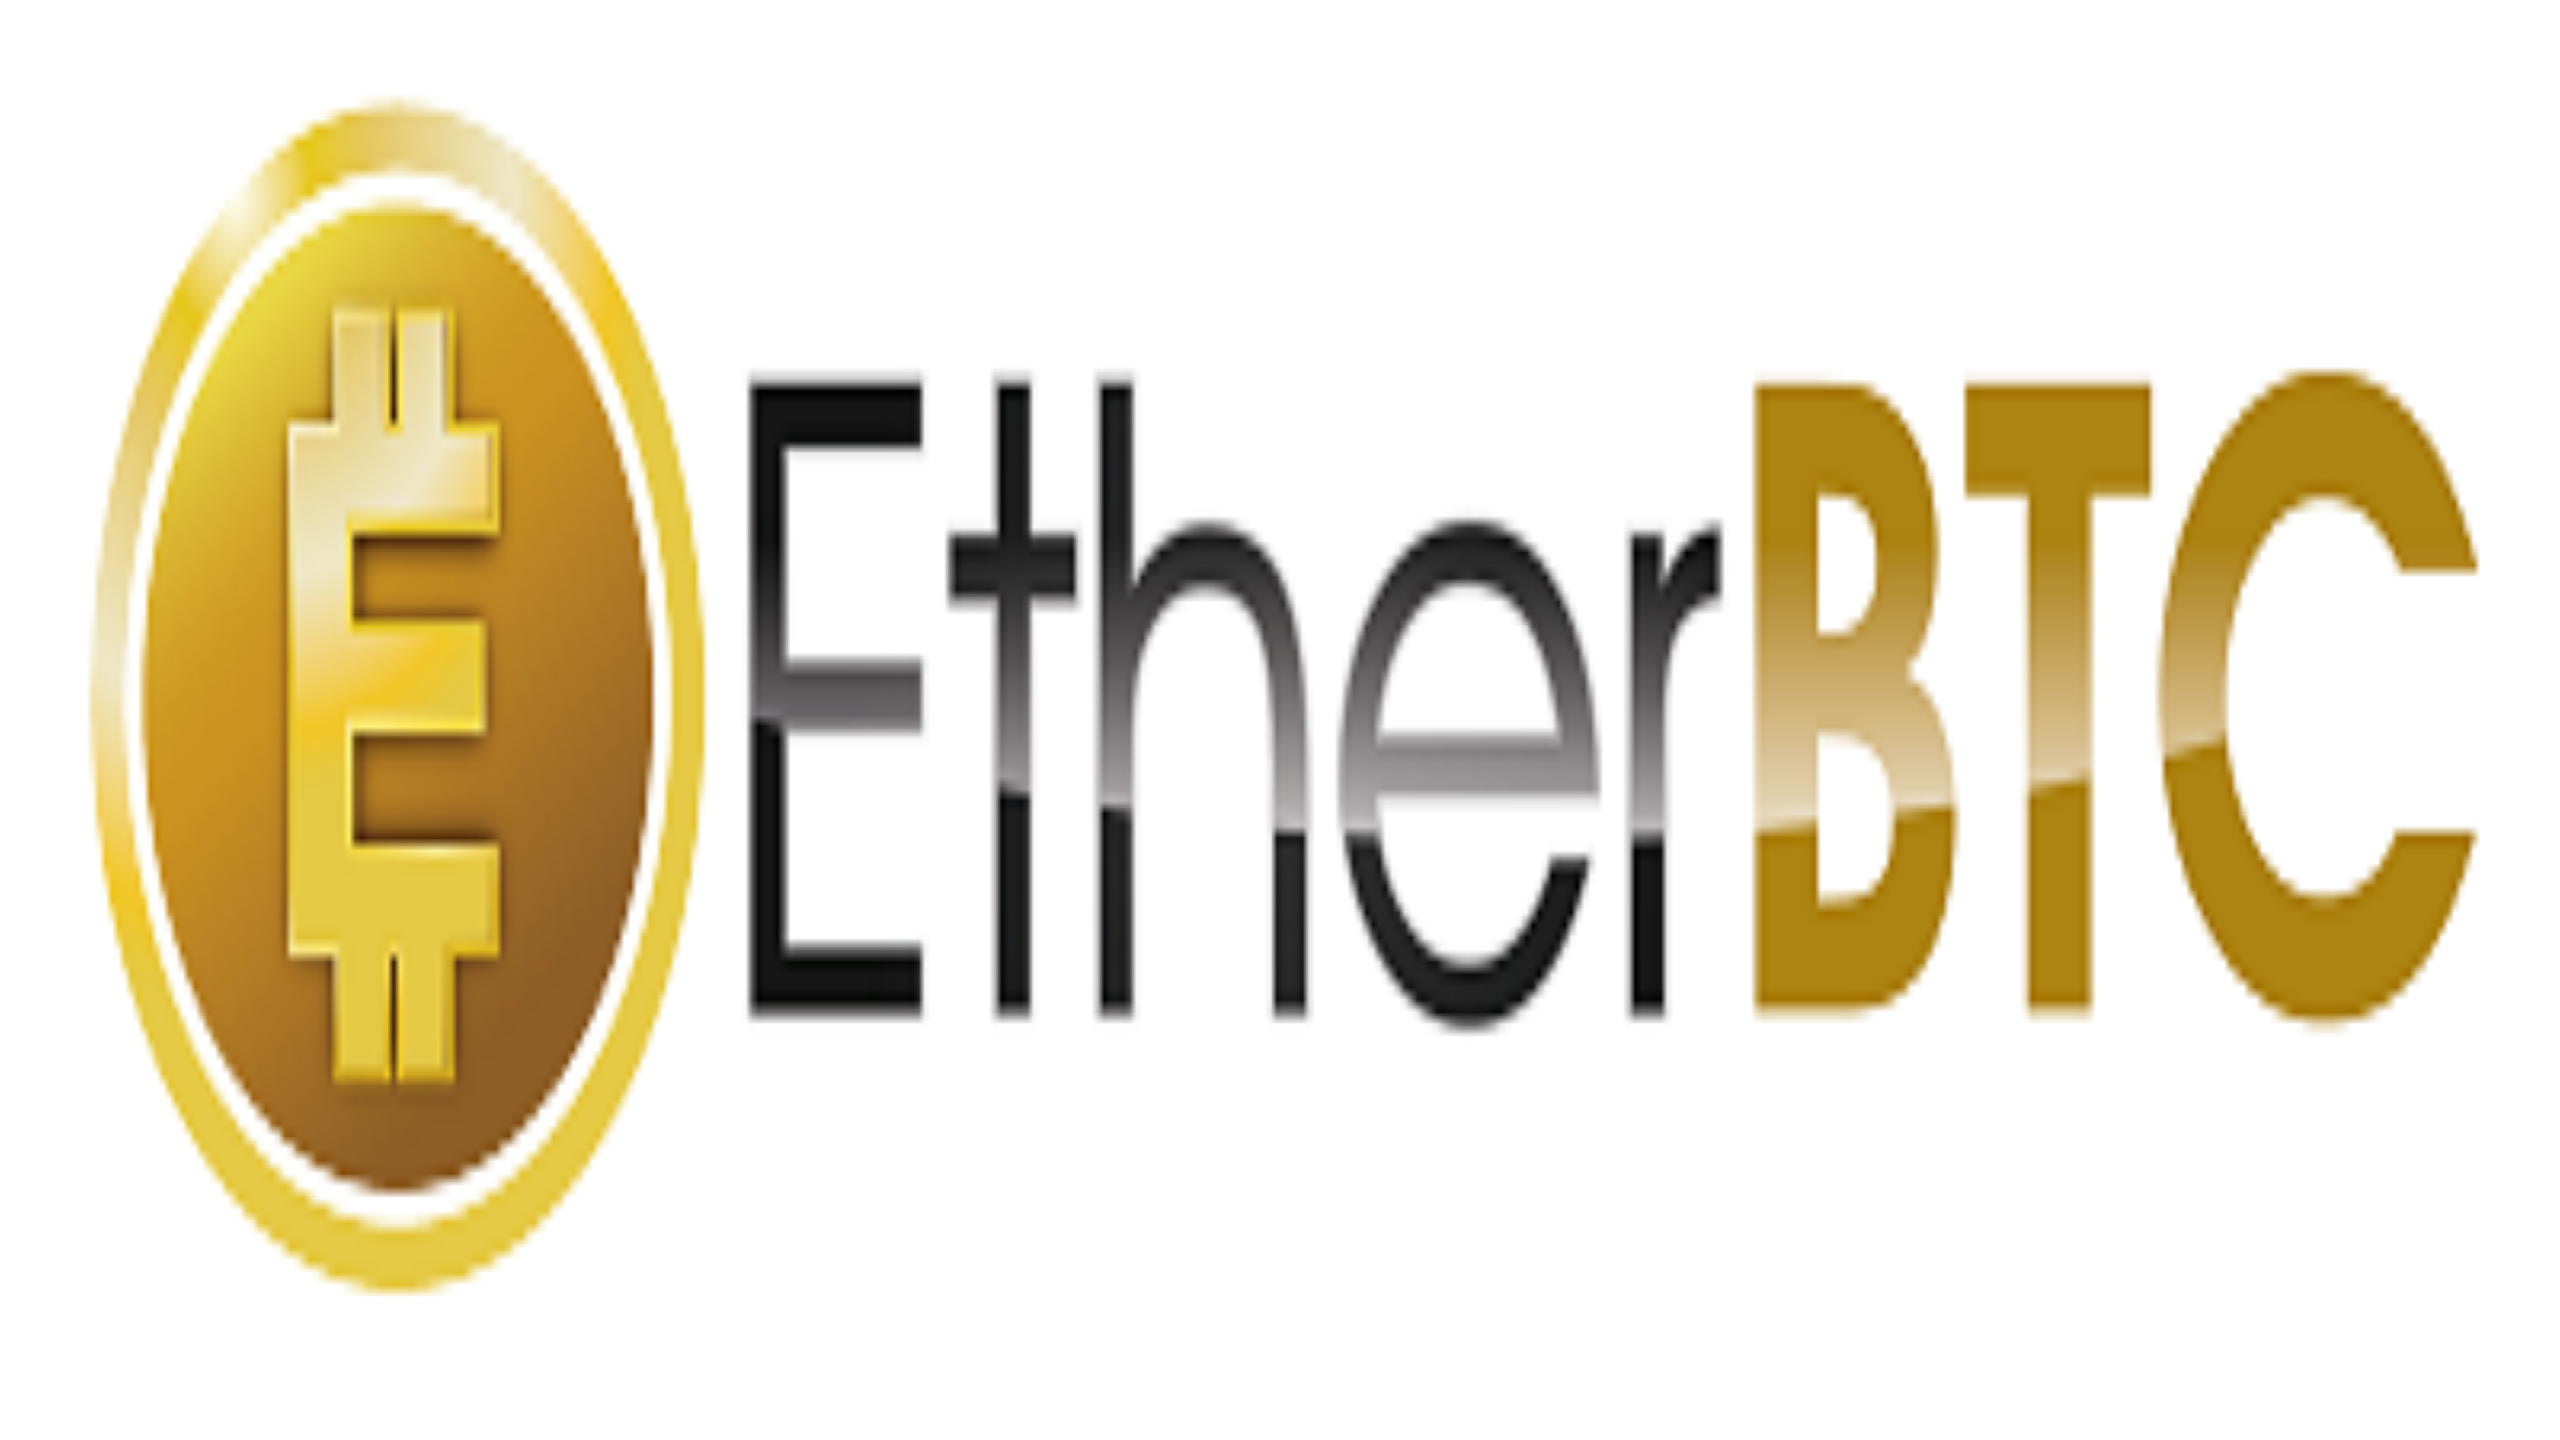 EtherBTC_white_bkgd_400x-2560x1440.png